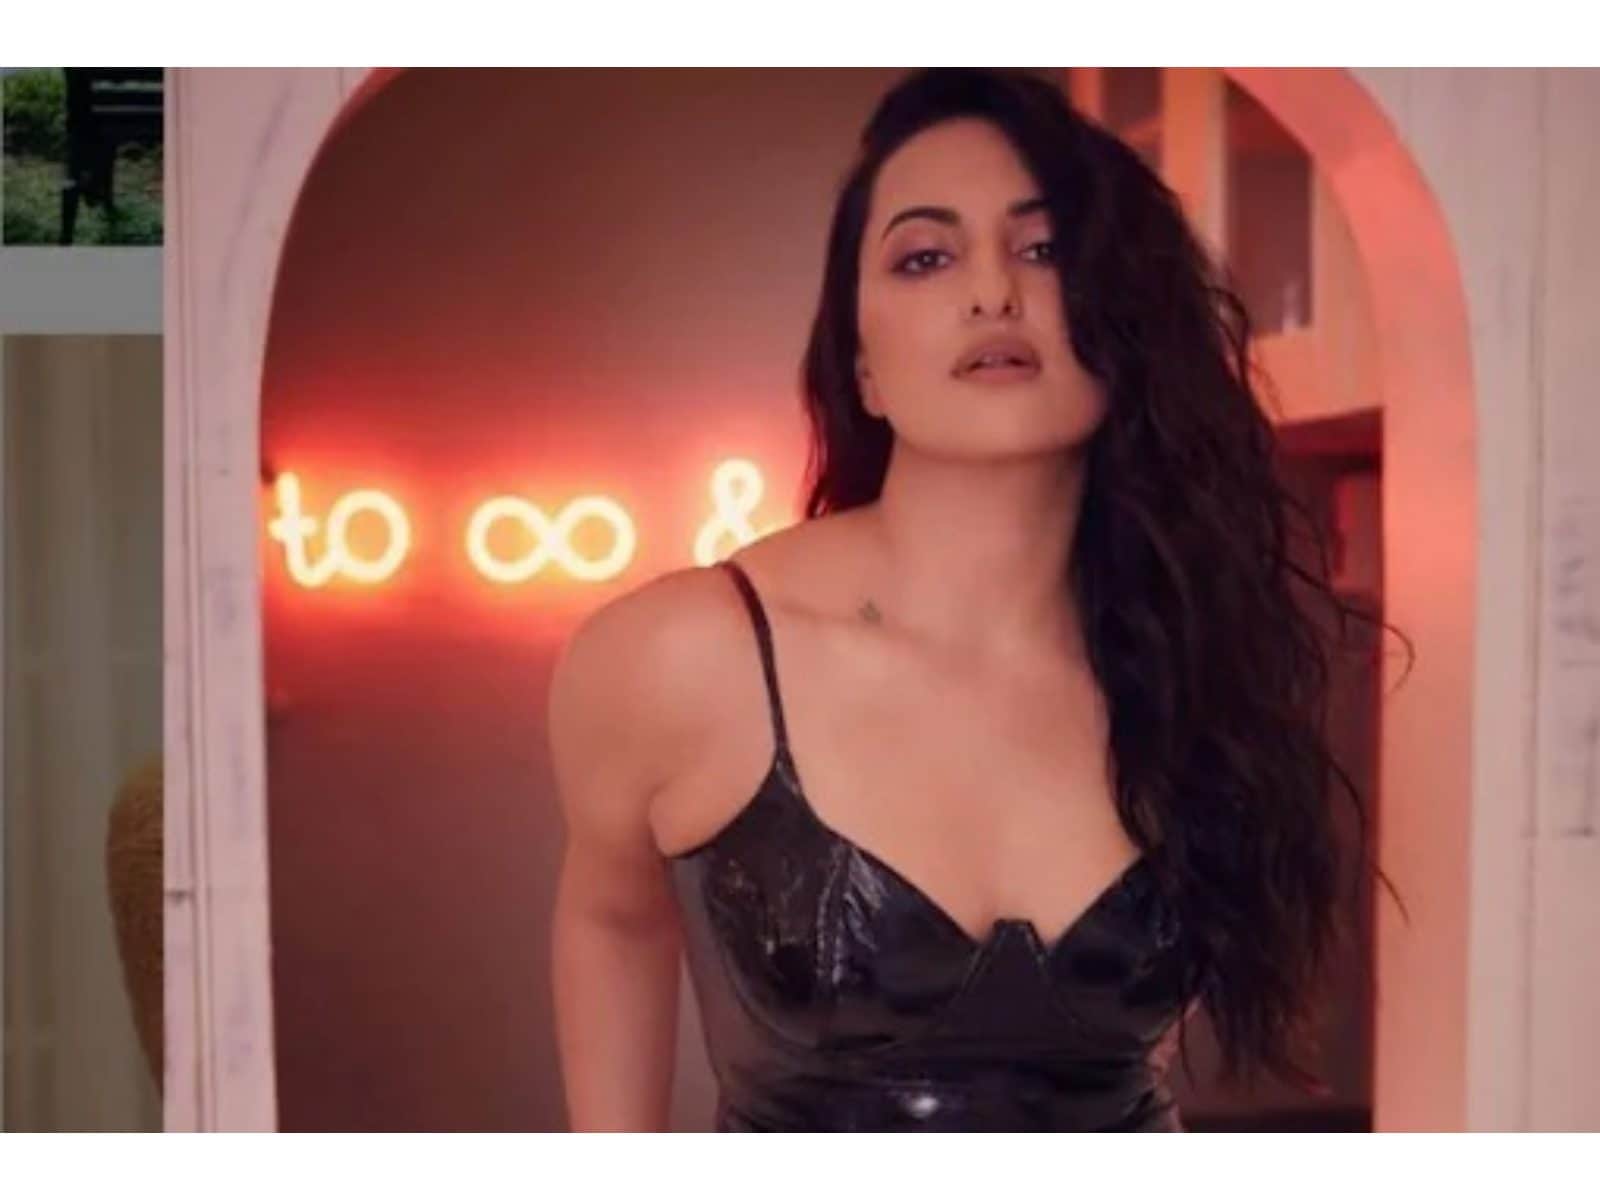 andrew richey recommends sonakshi sinha hottest pic pic